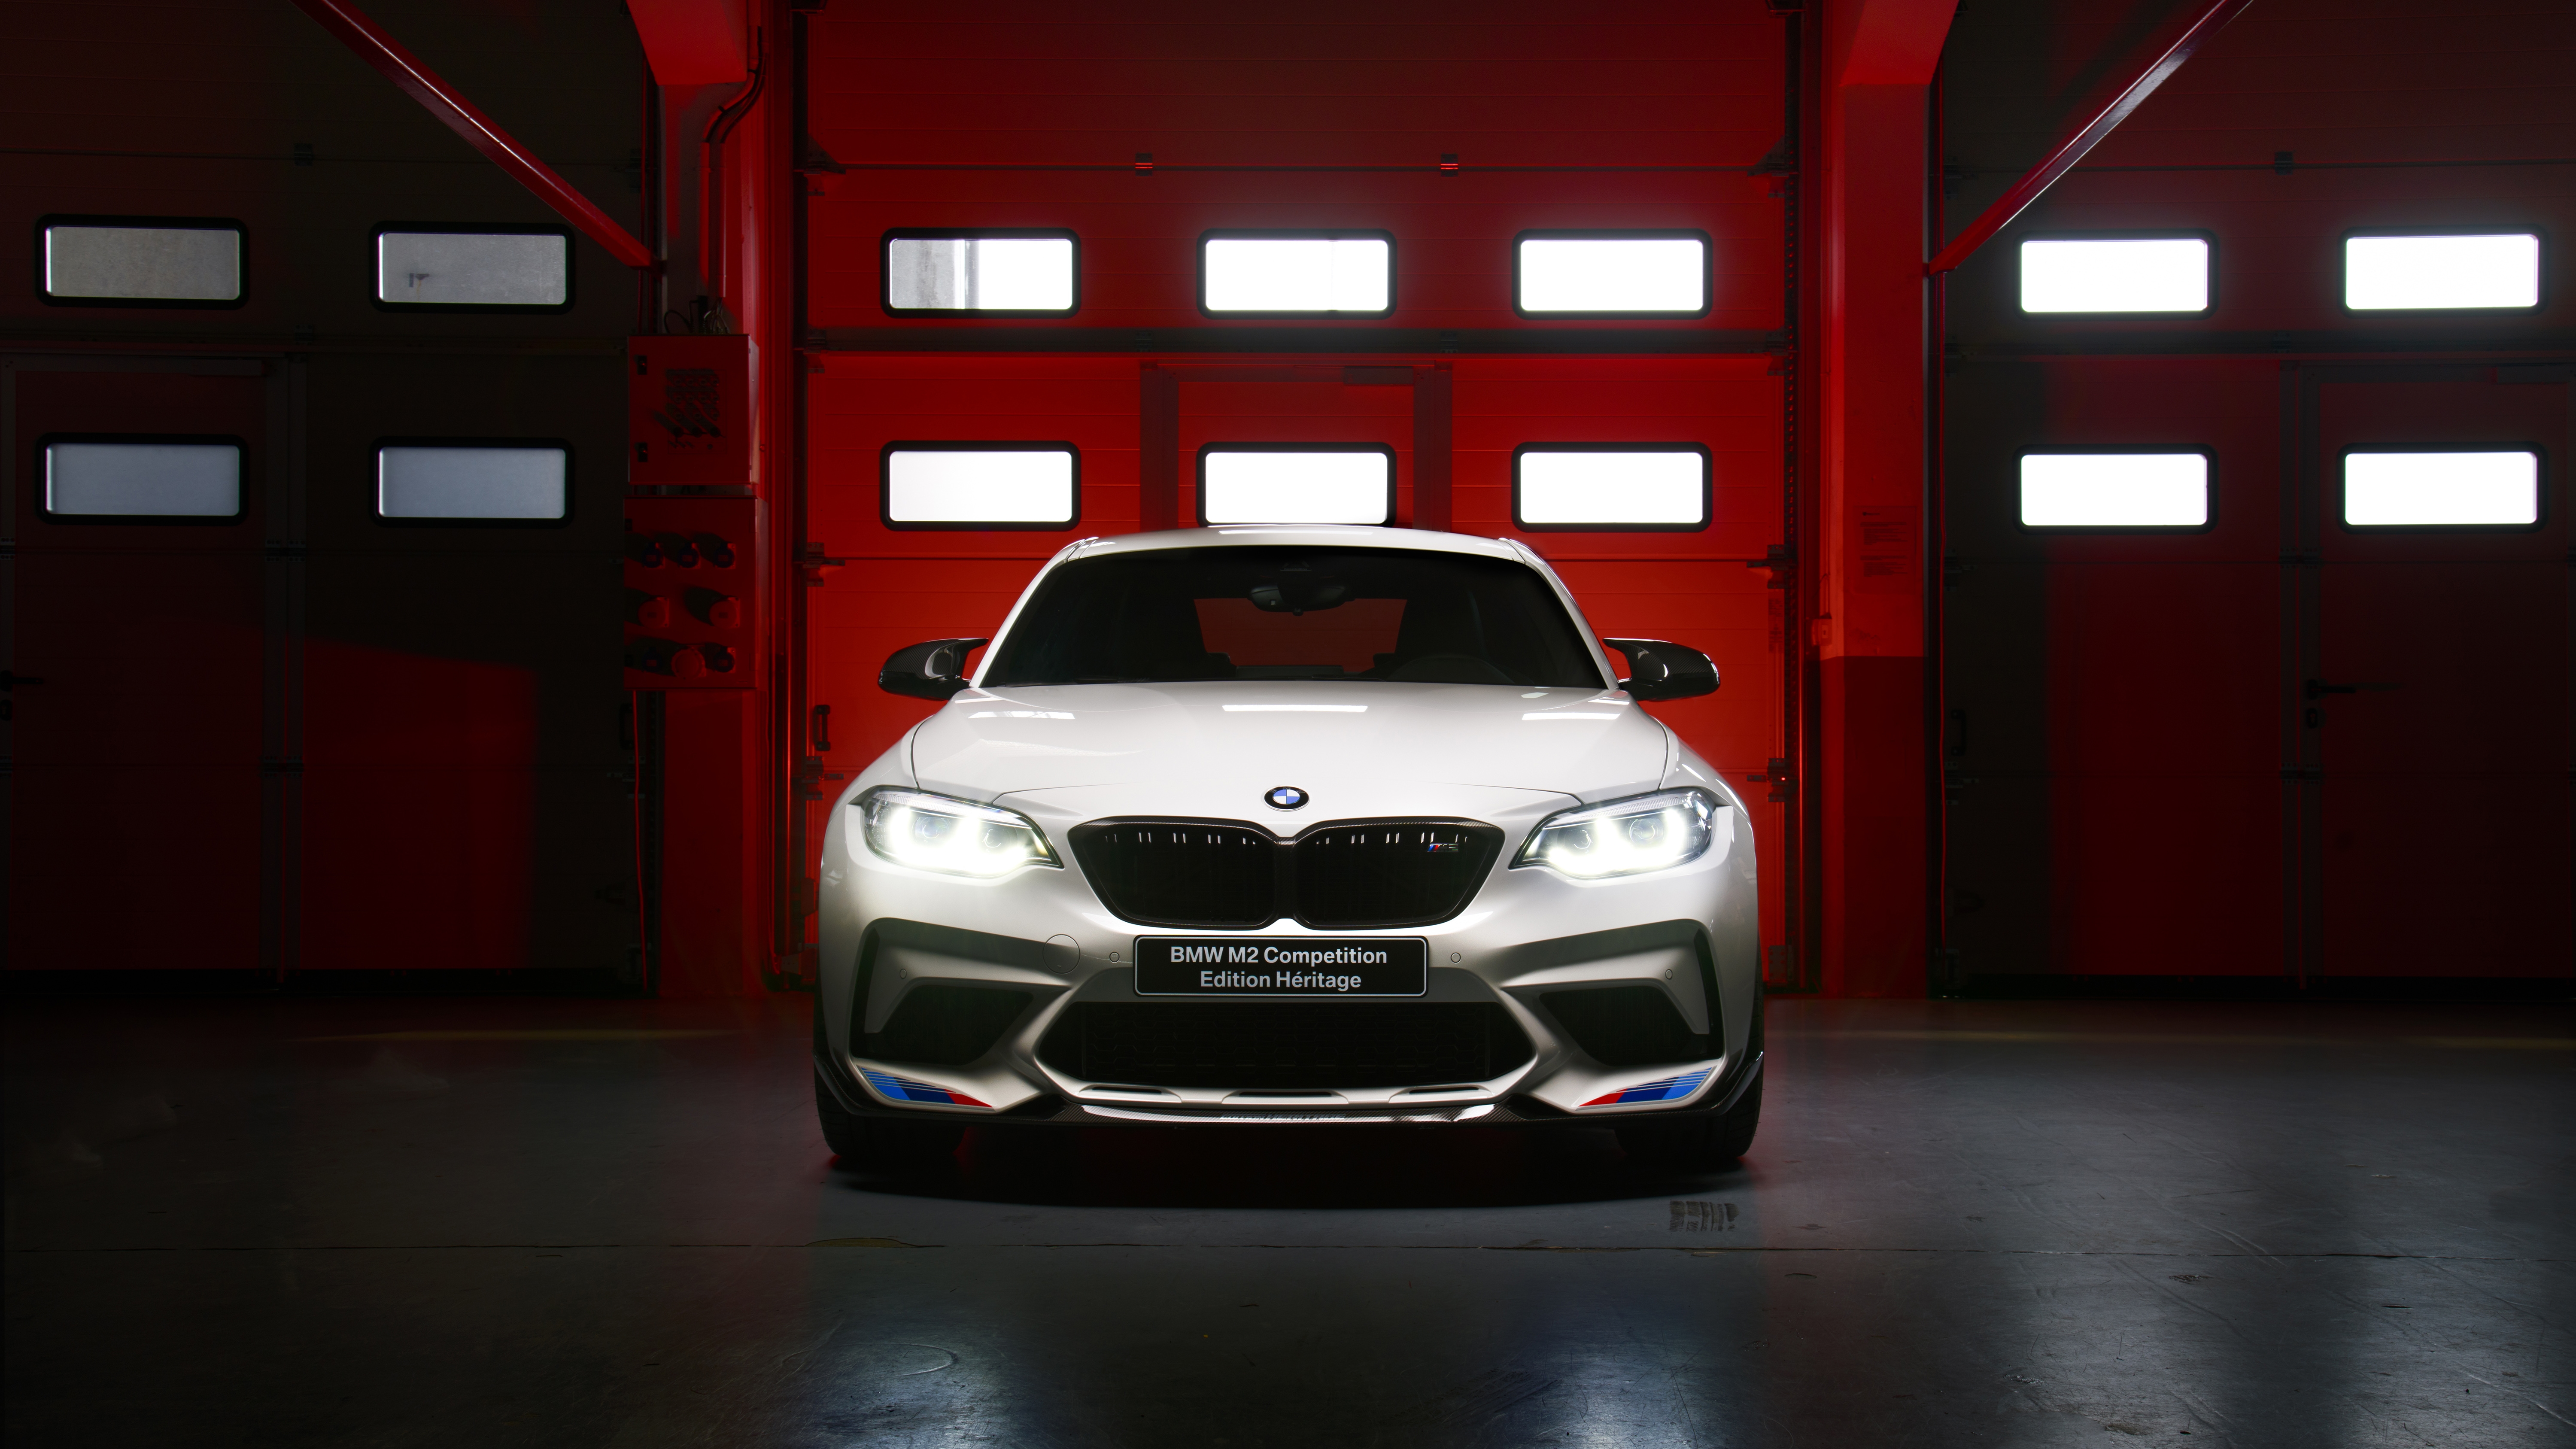 Wallpapers competition BMW M2 heritage edition white luxury on the desktop